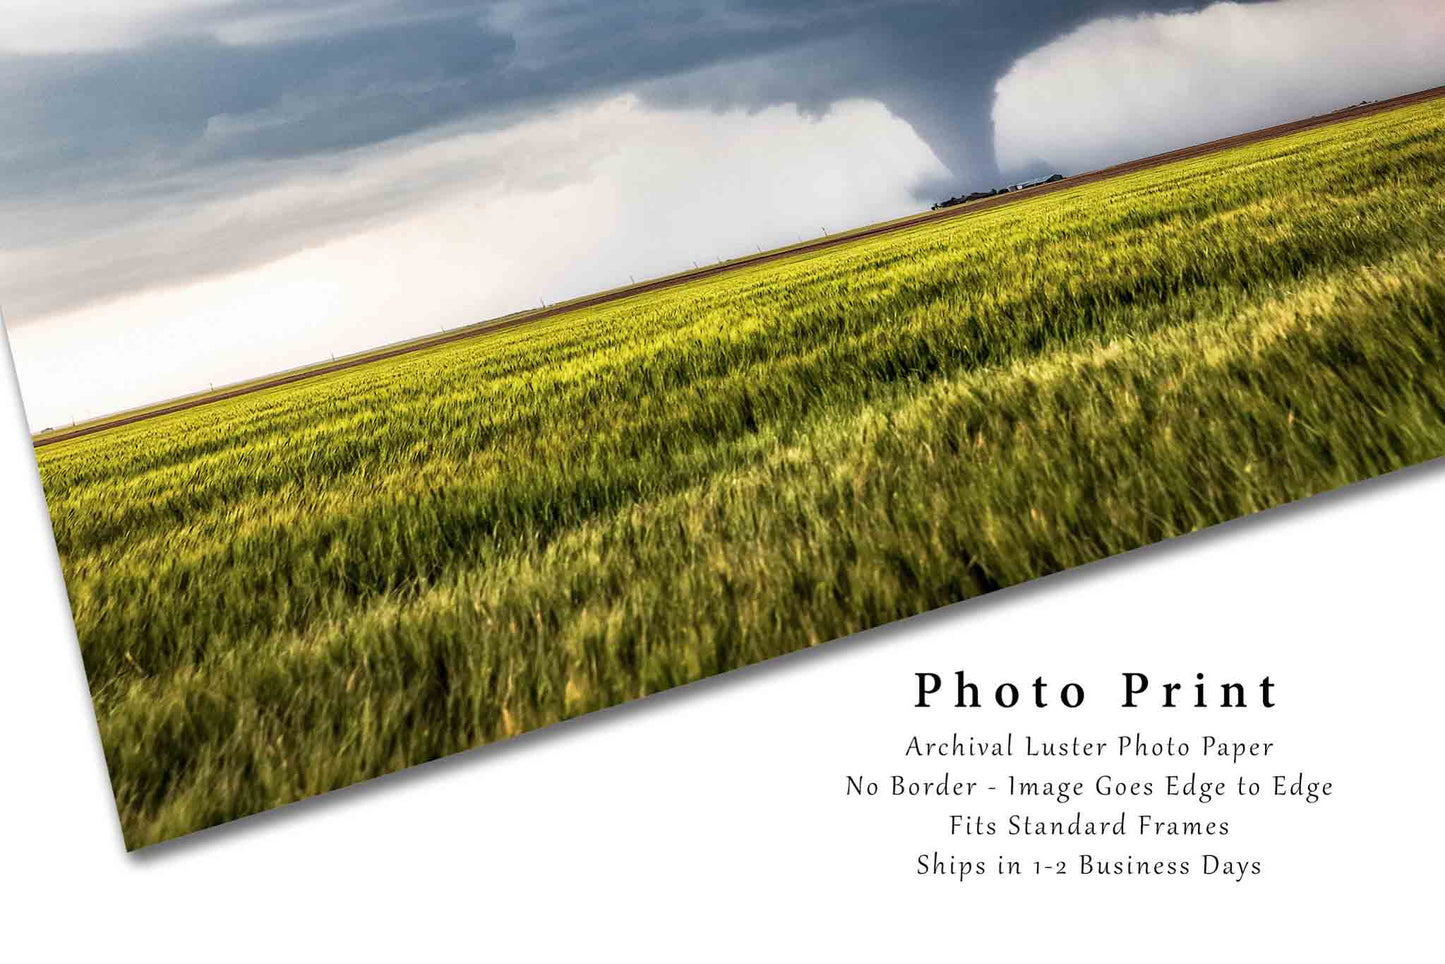 Tornado Photography Print - Picture of Large Tornado Passing Behind Farm House in Southwest Kansas Weather Home Decor